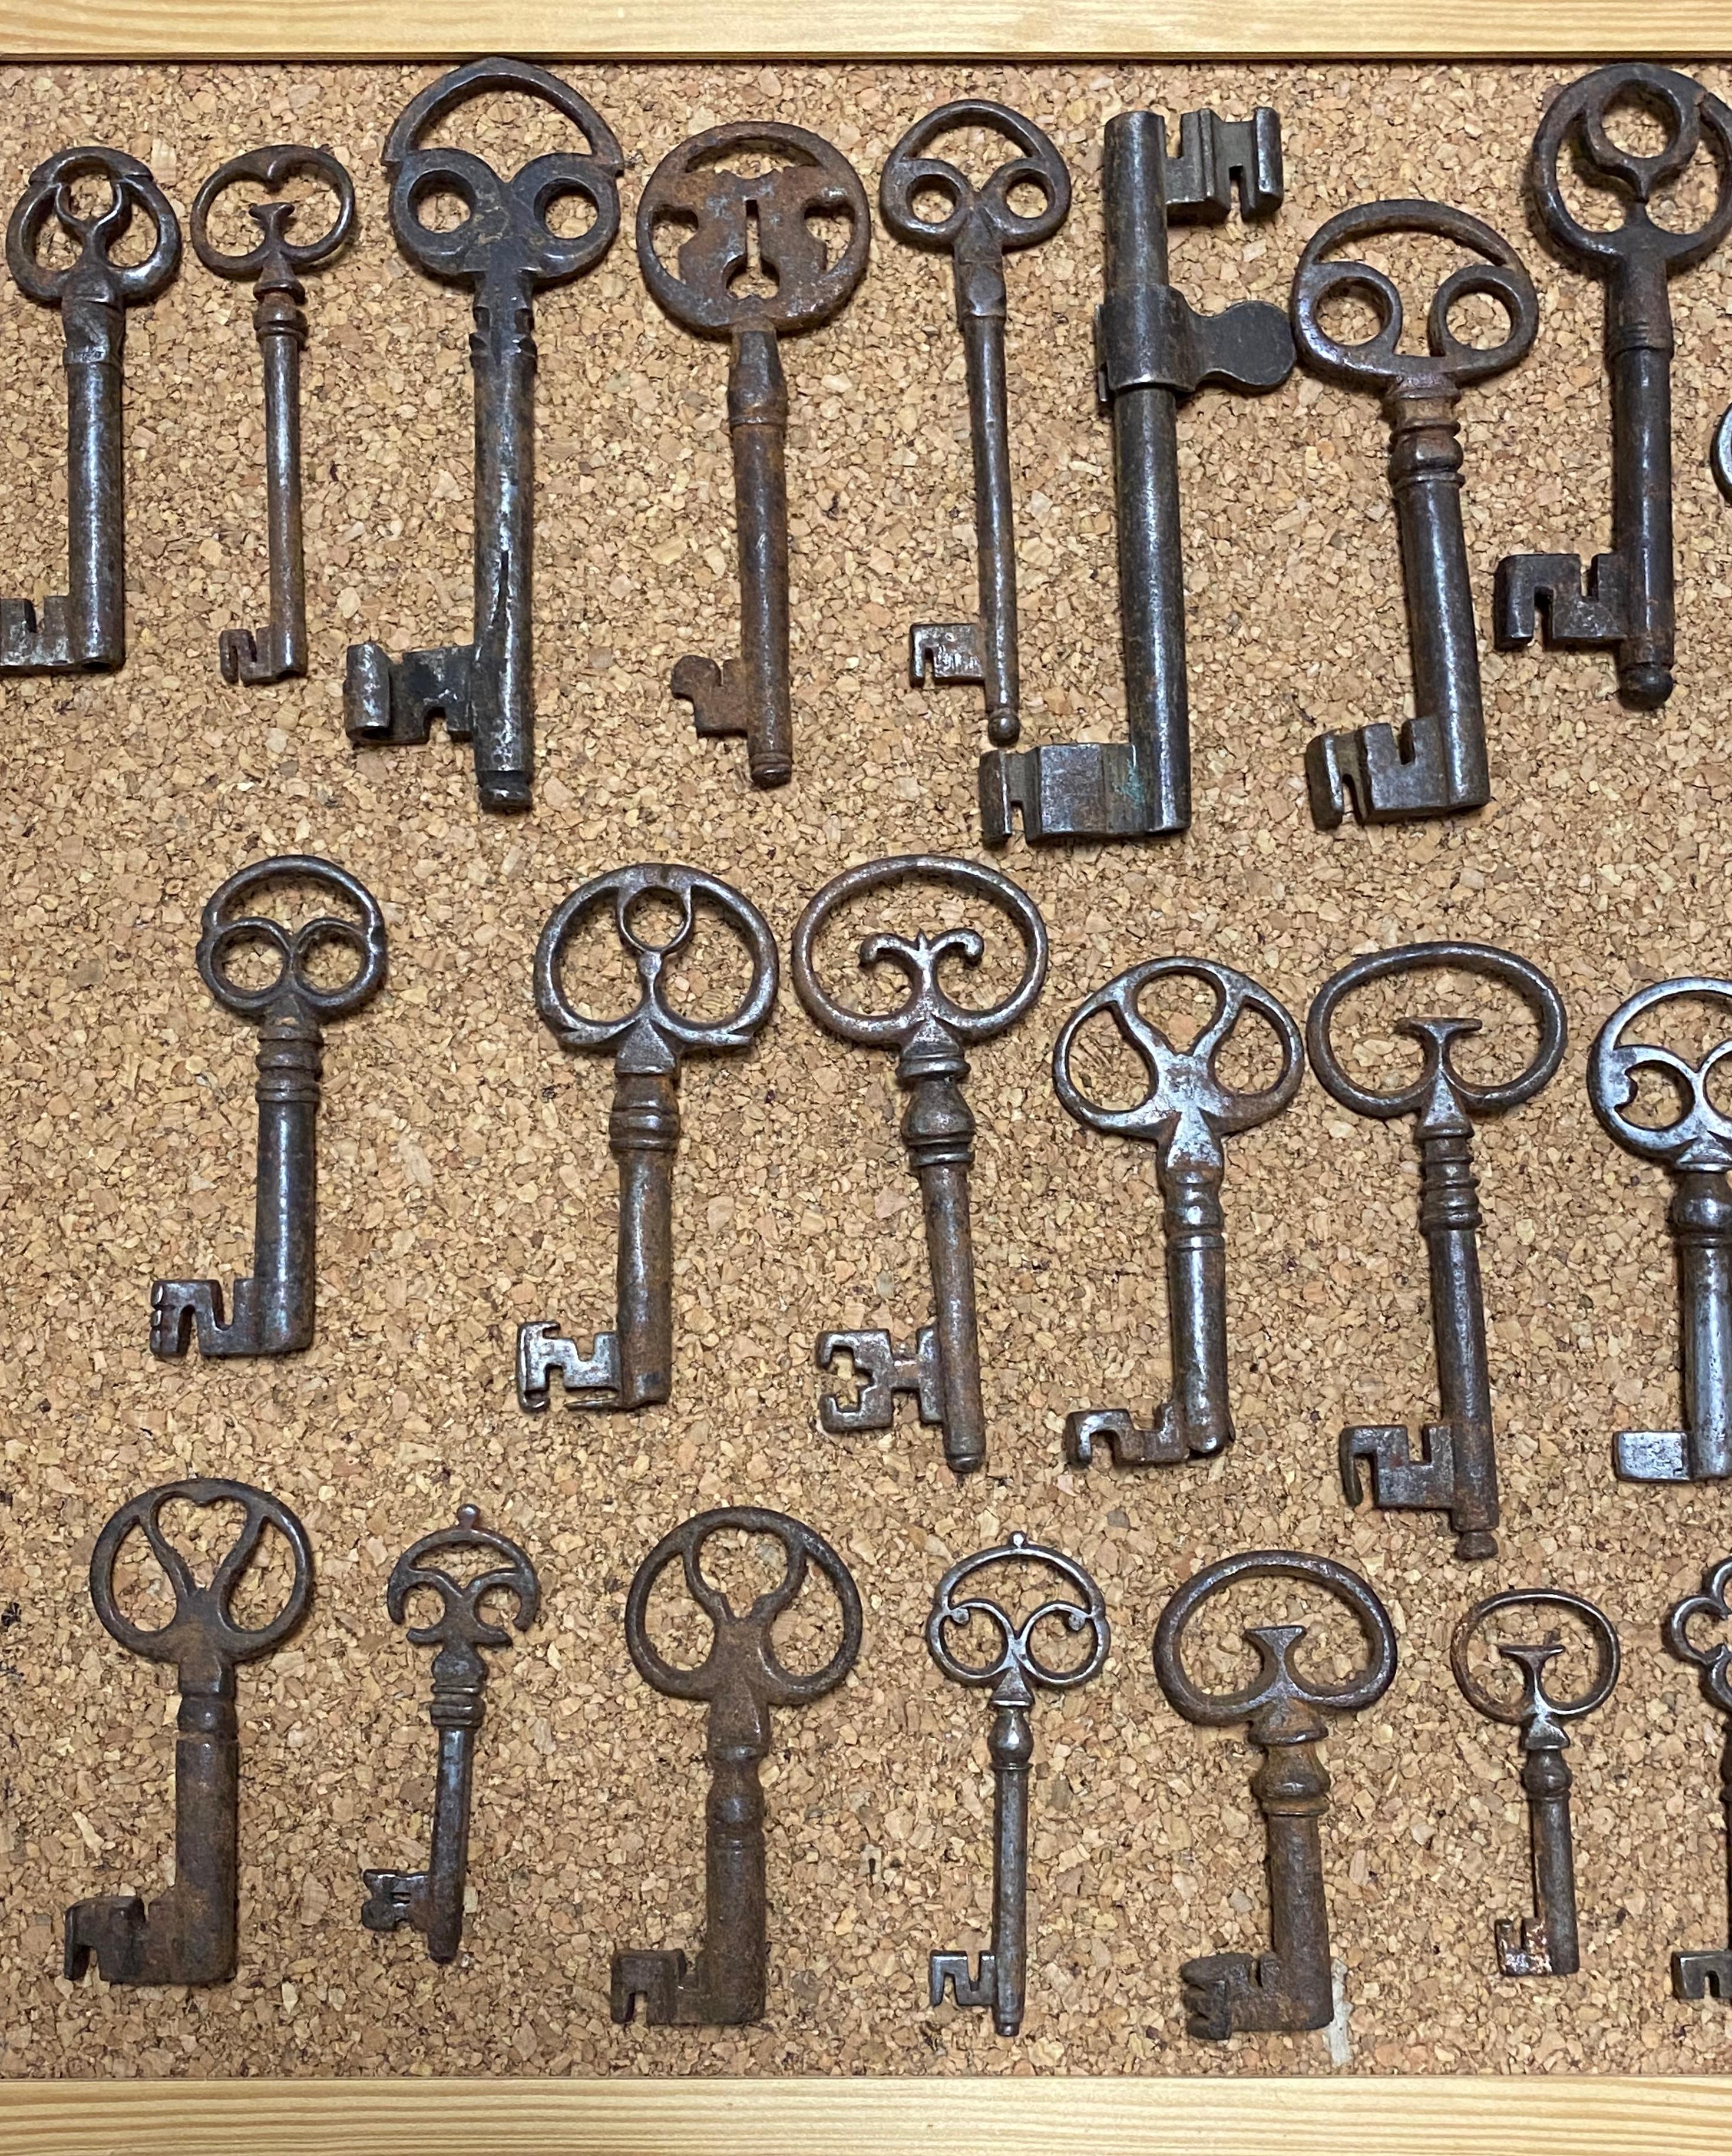 Collection of keys with padlock. Wrought iron, 17th-19th centuries.
Collection consisting of thirty-one keys, a piece of hardware and a padlock with its key, all made of wrought iron, with some pieces retaining its original patina. By the variety